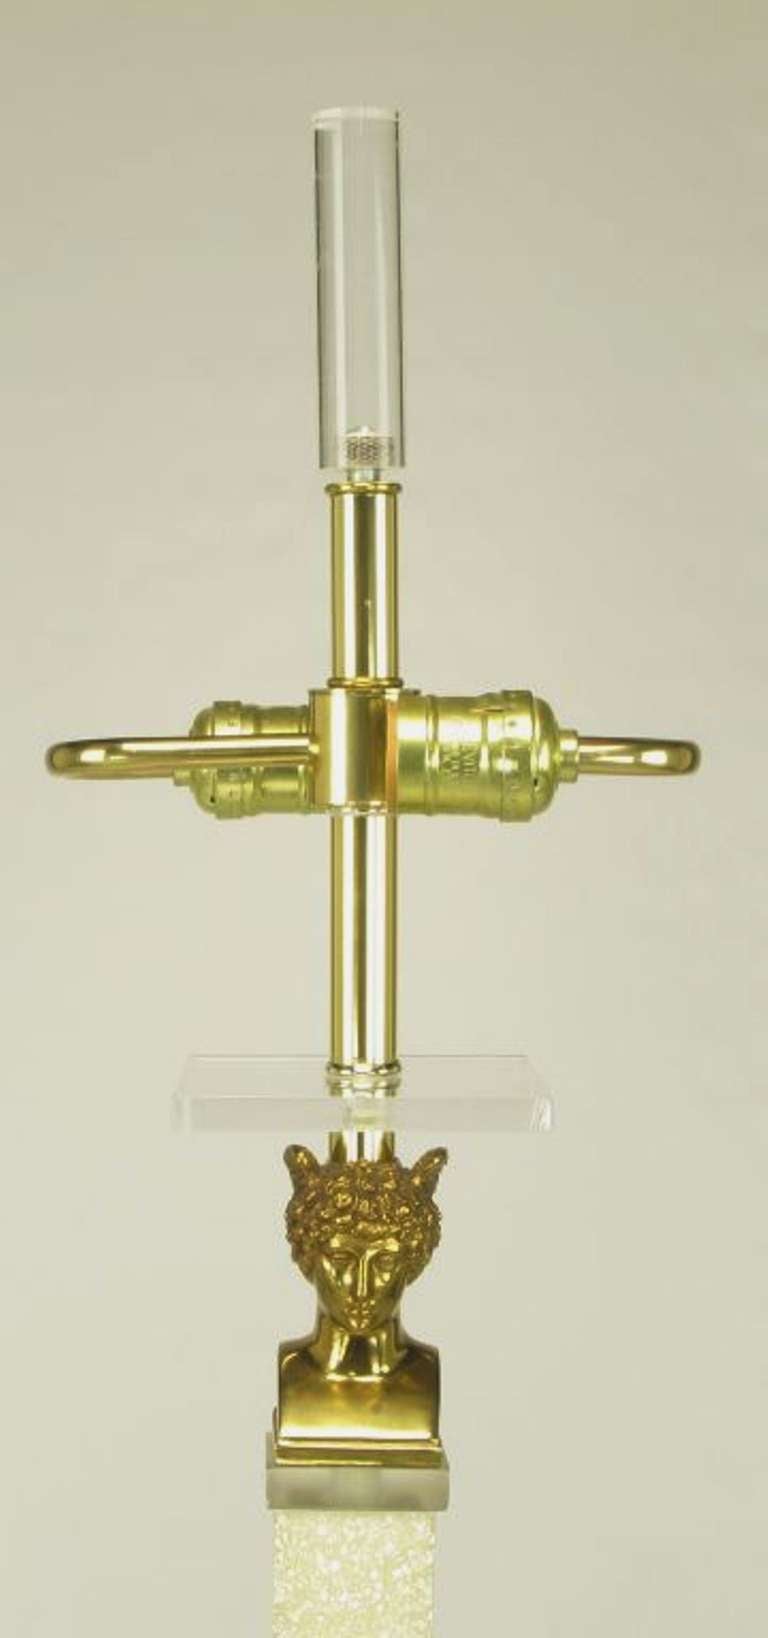 20th Century Empire Revival Floor Lamp In Lucite & Brass By Bauer Lamp